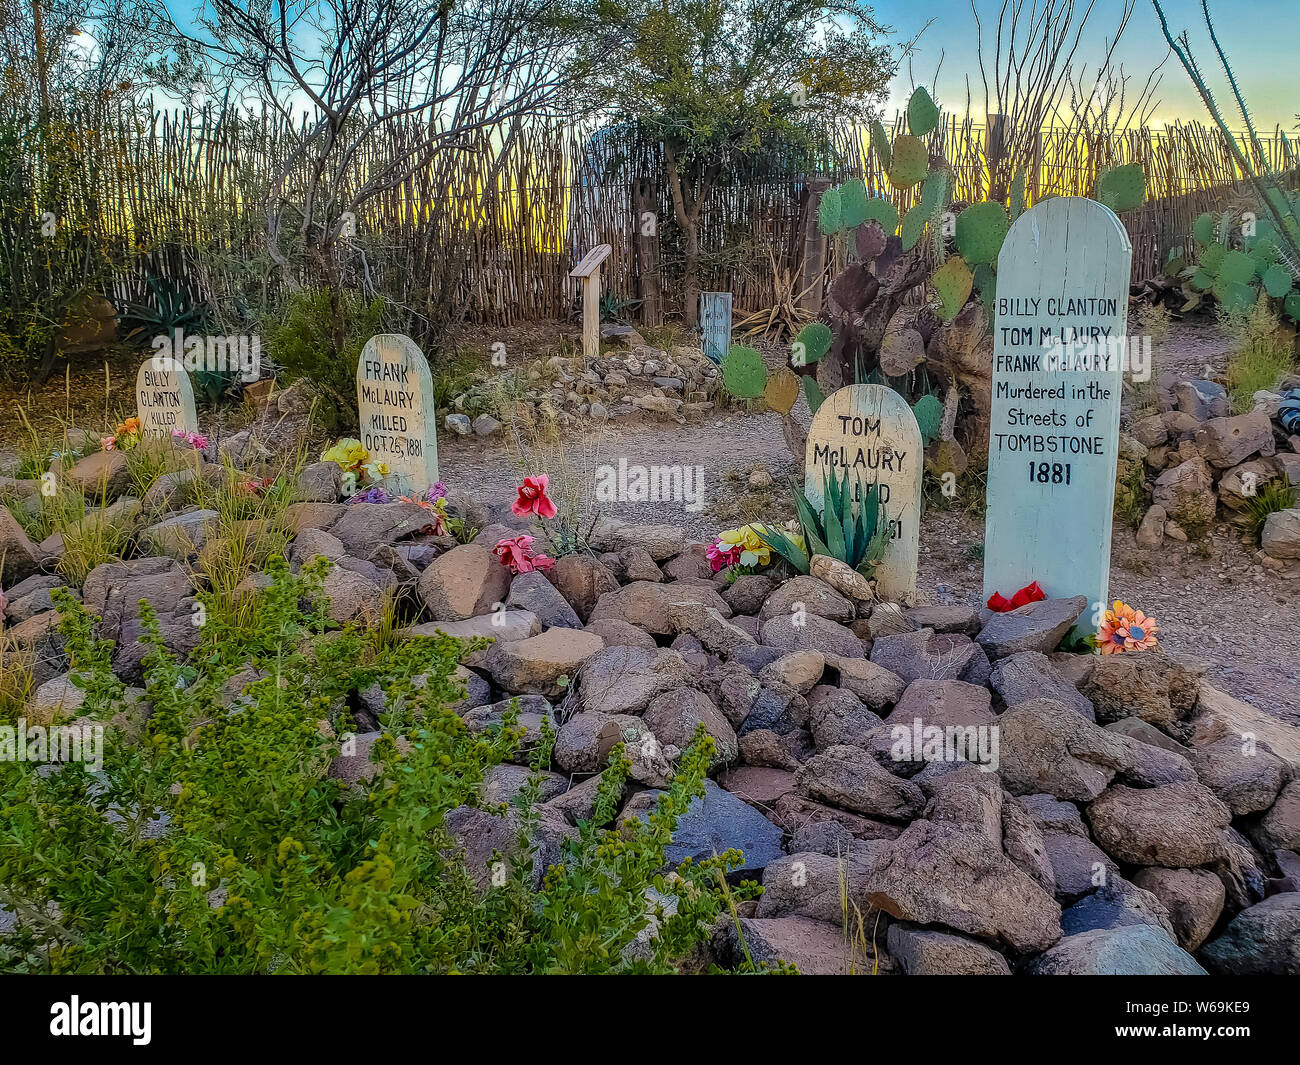 Boothill Graveyard. Billy Clayton, Tom McLaury, and Frank McLaury graves. OK Corral Shootout October 26th, 1881. 'Murdered in the streets of Tombstone Stock Photo